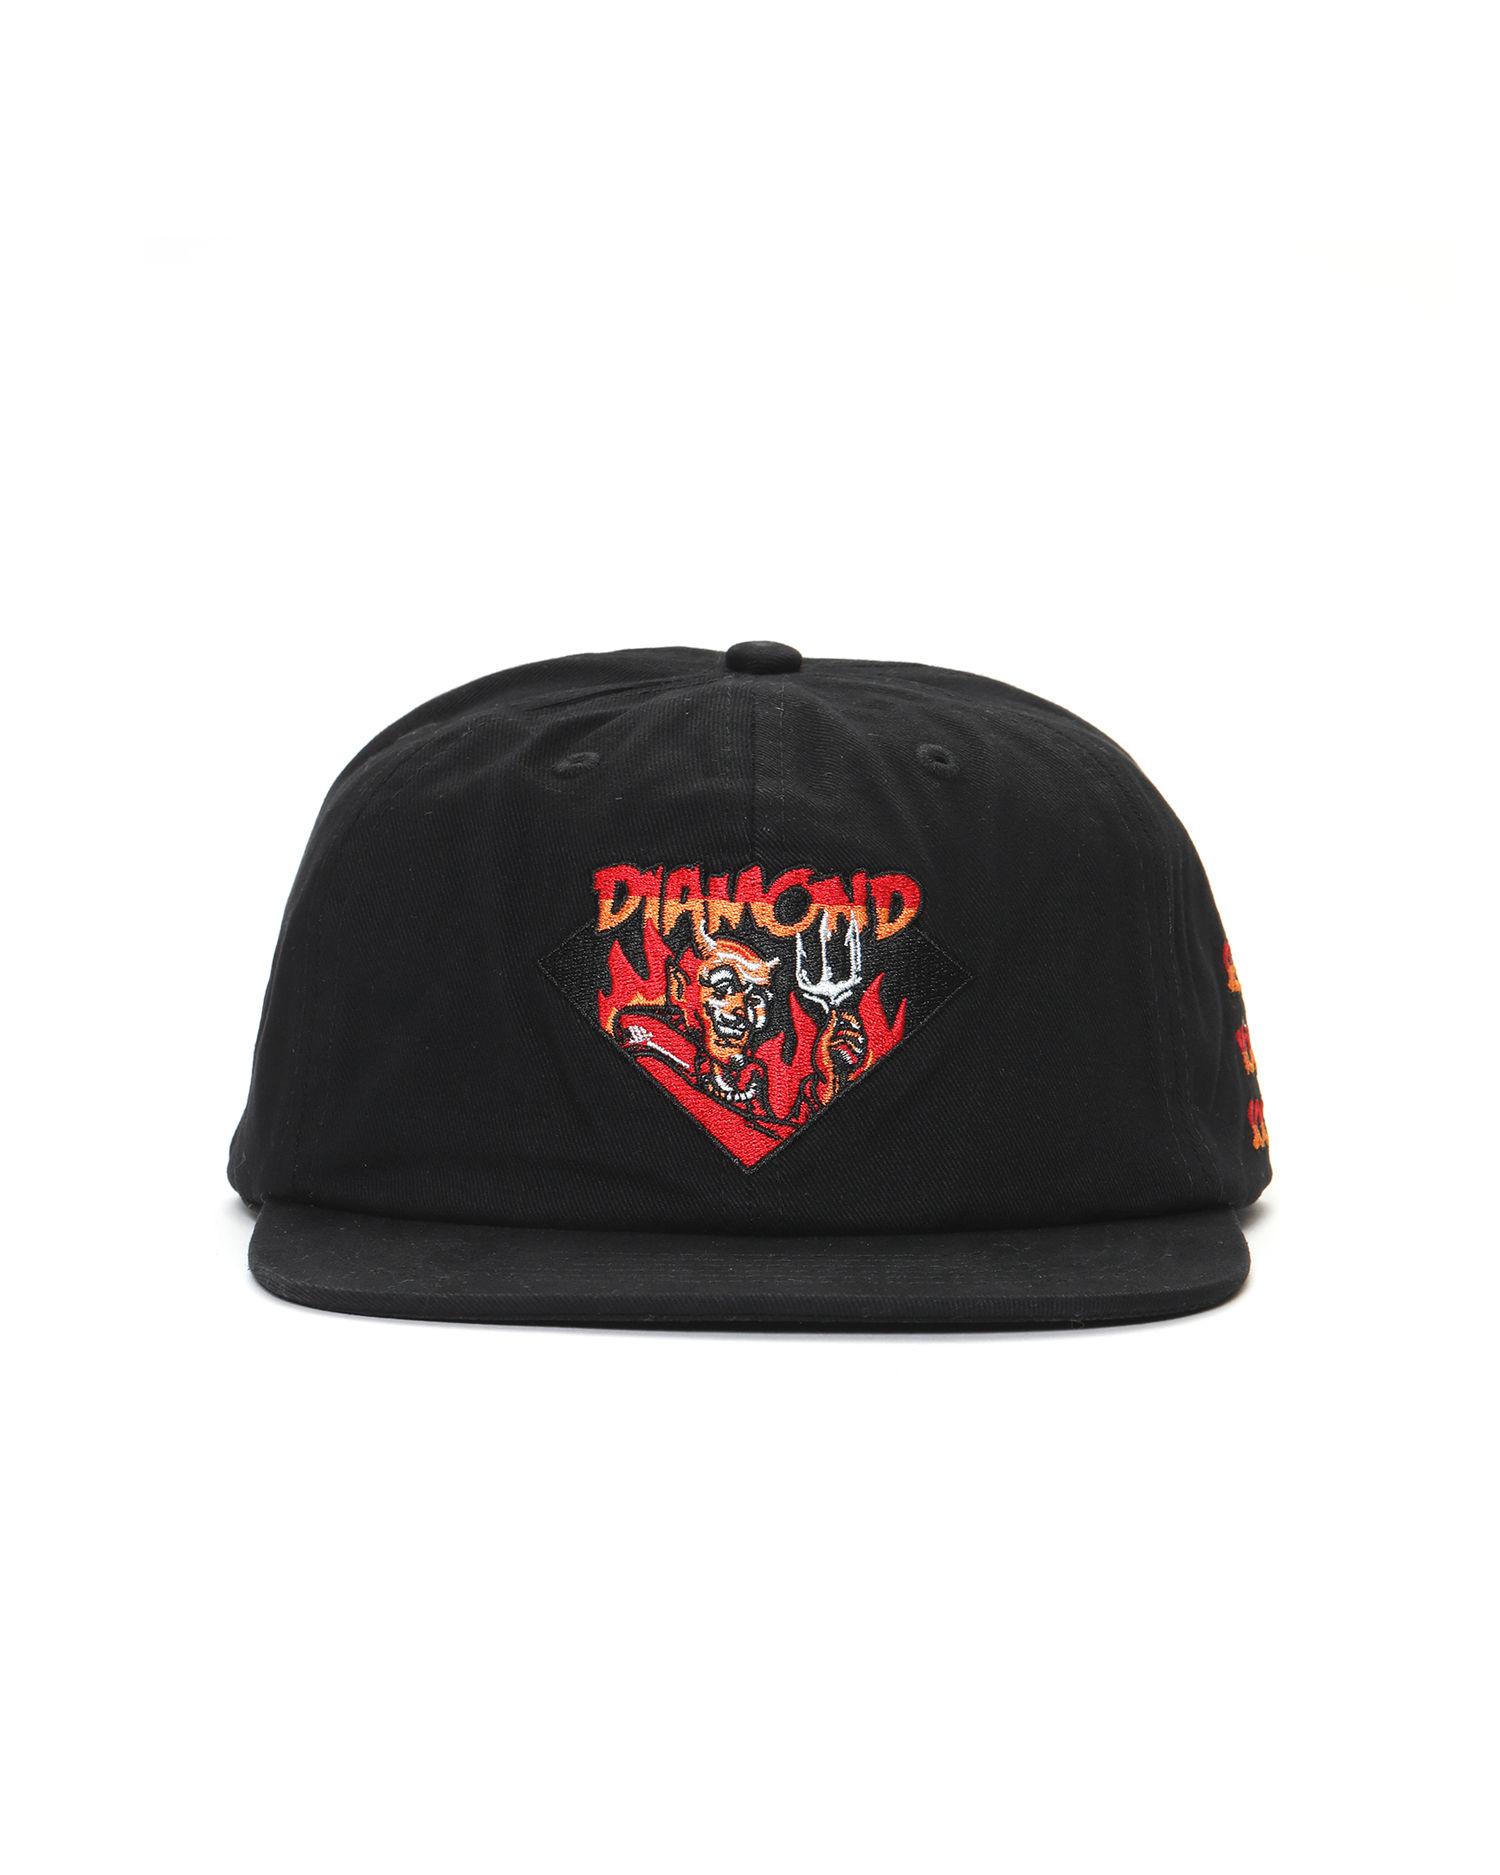 See You Soon Unstructured cap by DIAMOND SUPPLY CO.